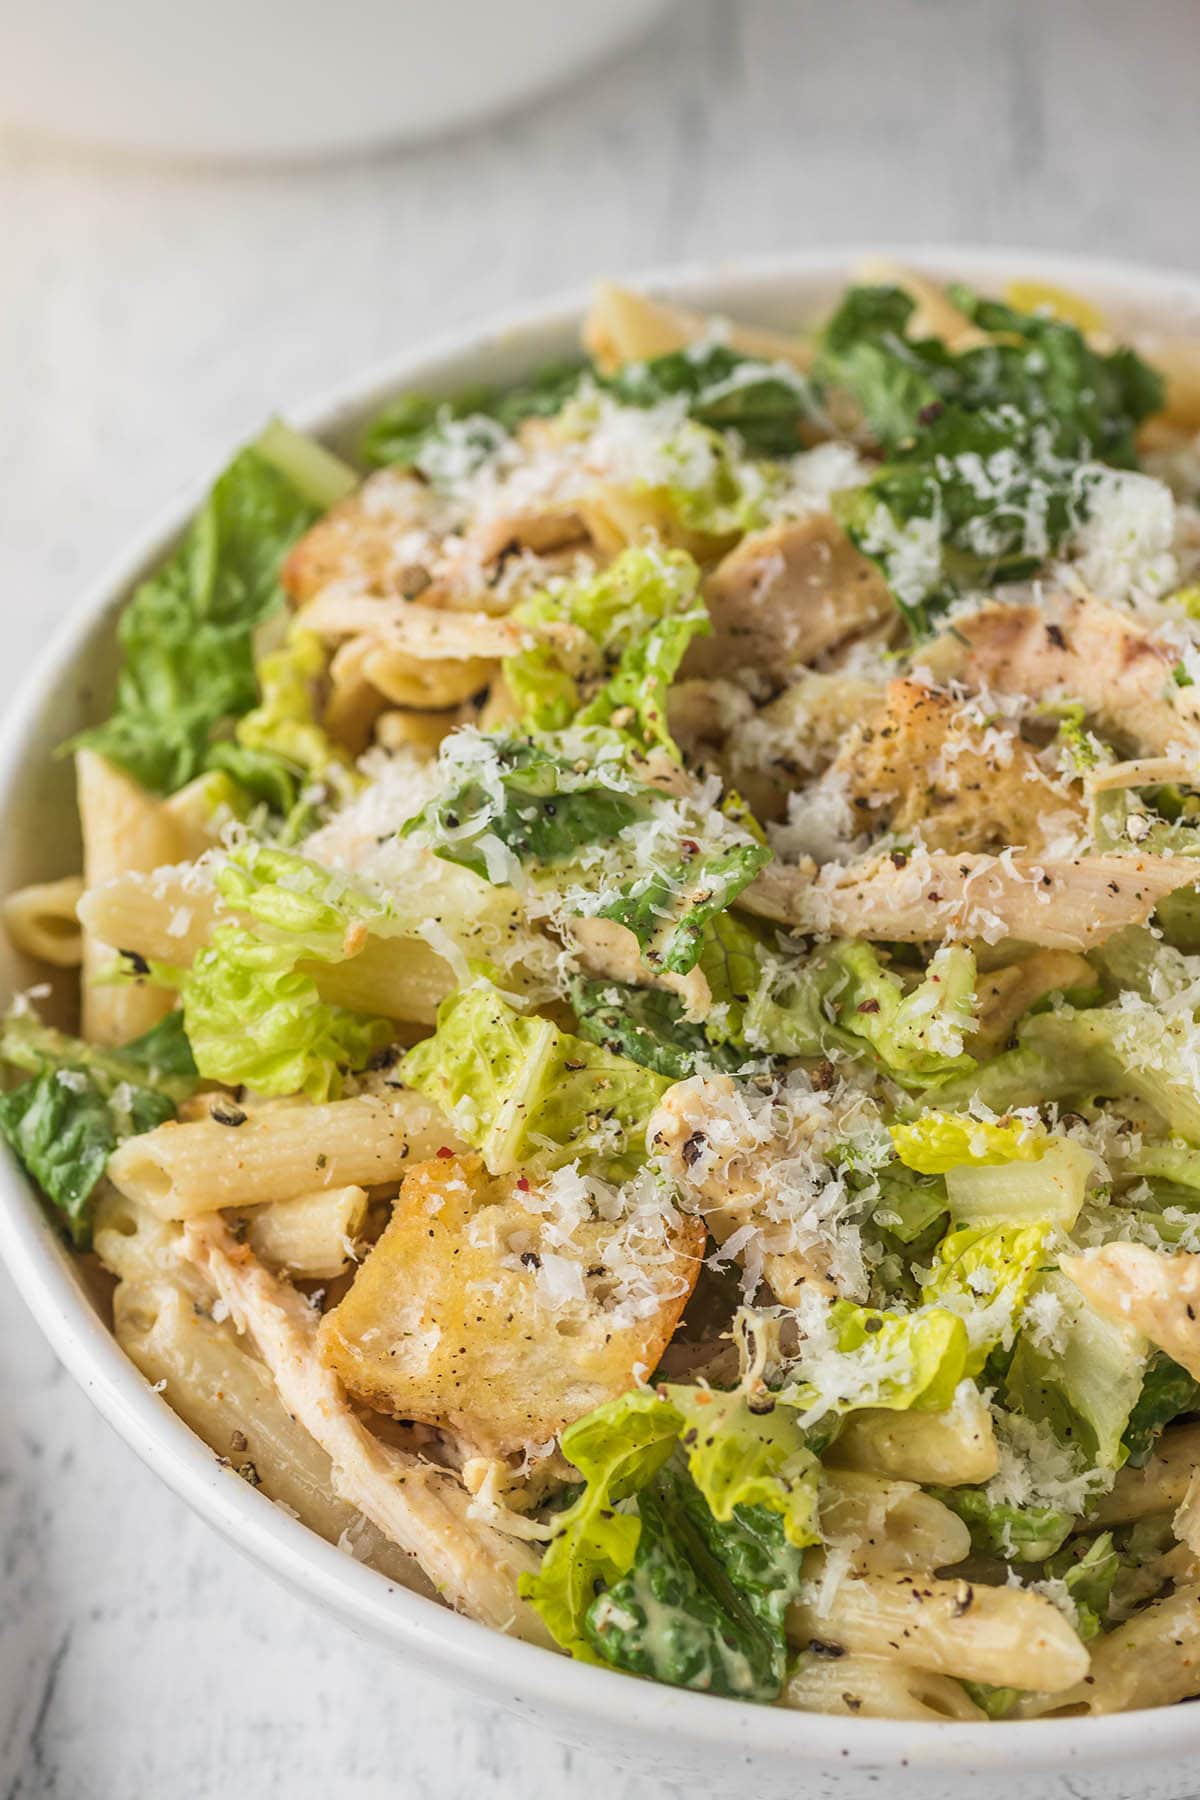 Chicken Caesar Pasta Salad garnished with parmesan cheese and black pepper.